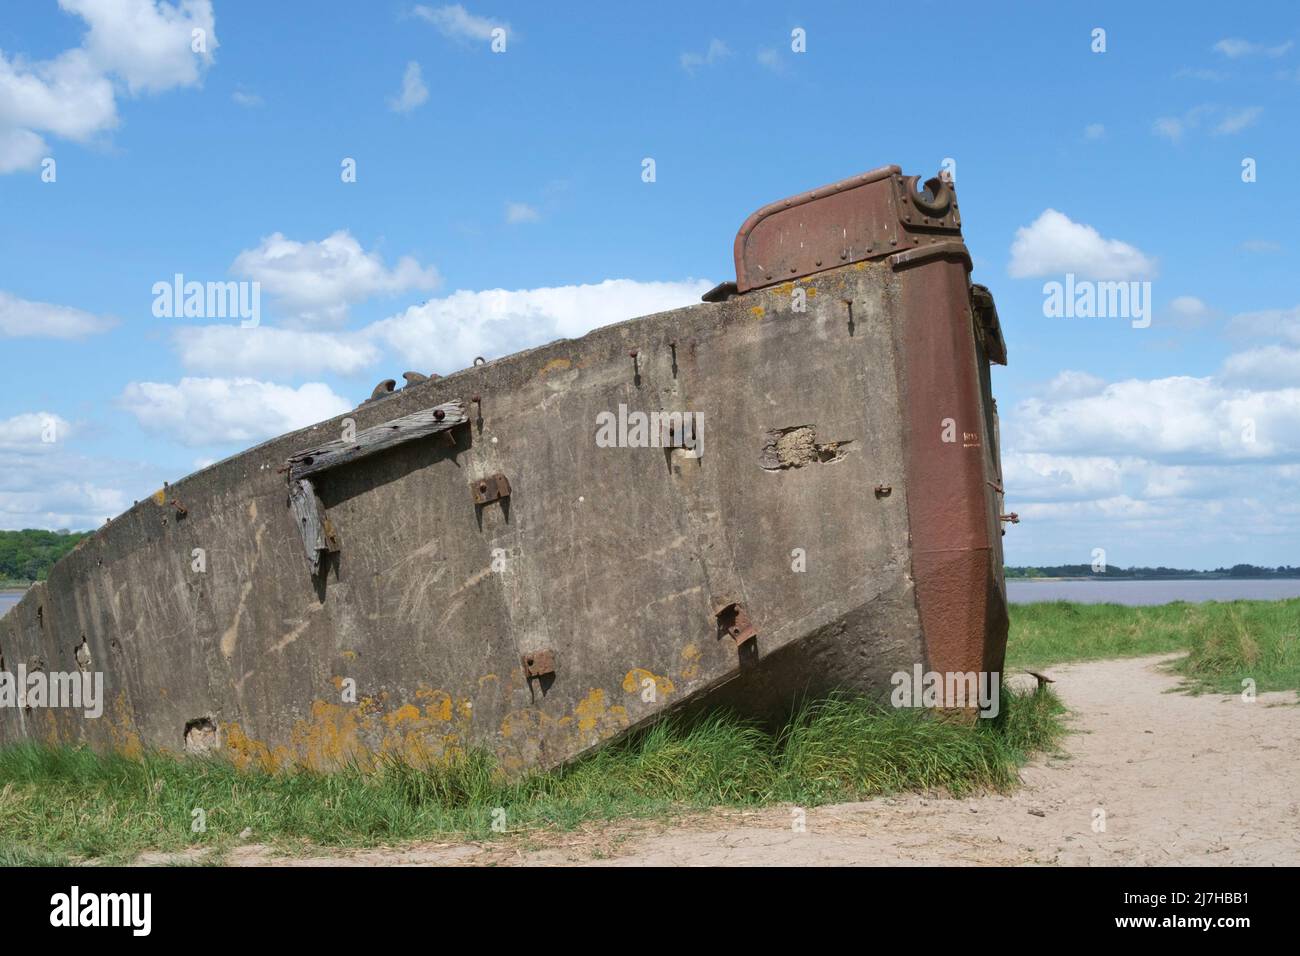 The Hulks and wrecks on the Banks of the river Severn at Purton Glos UK Stock Photo